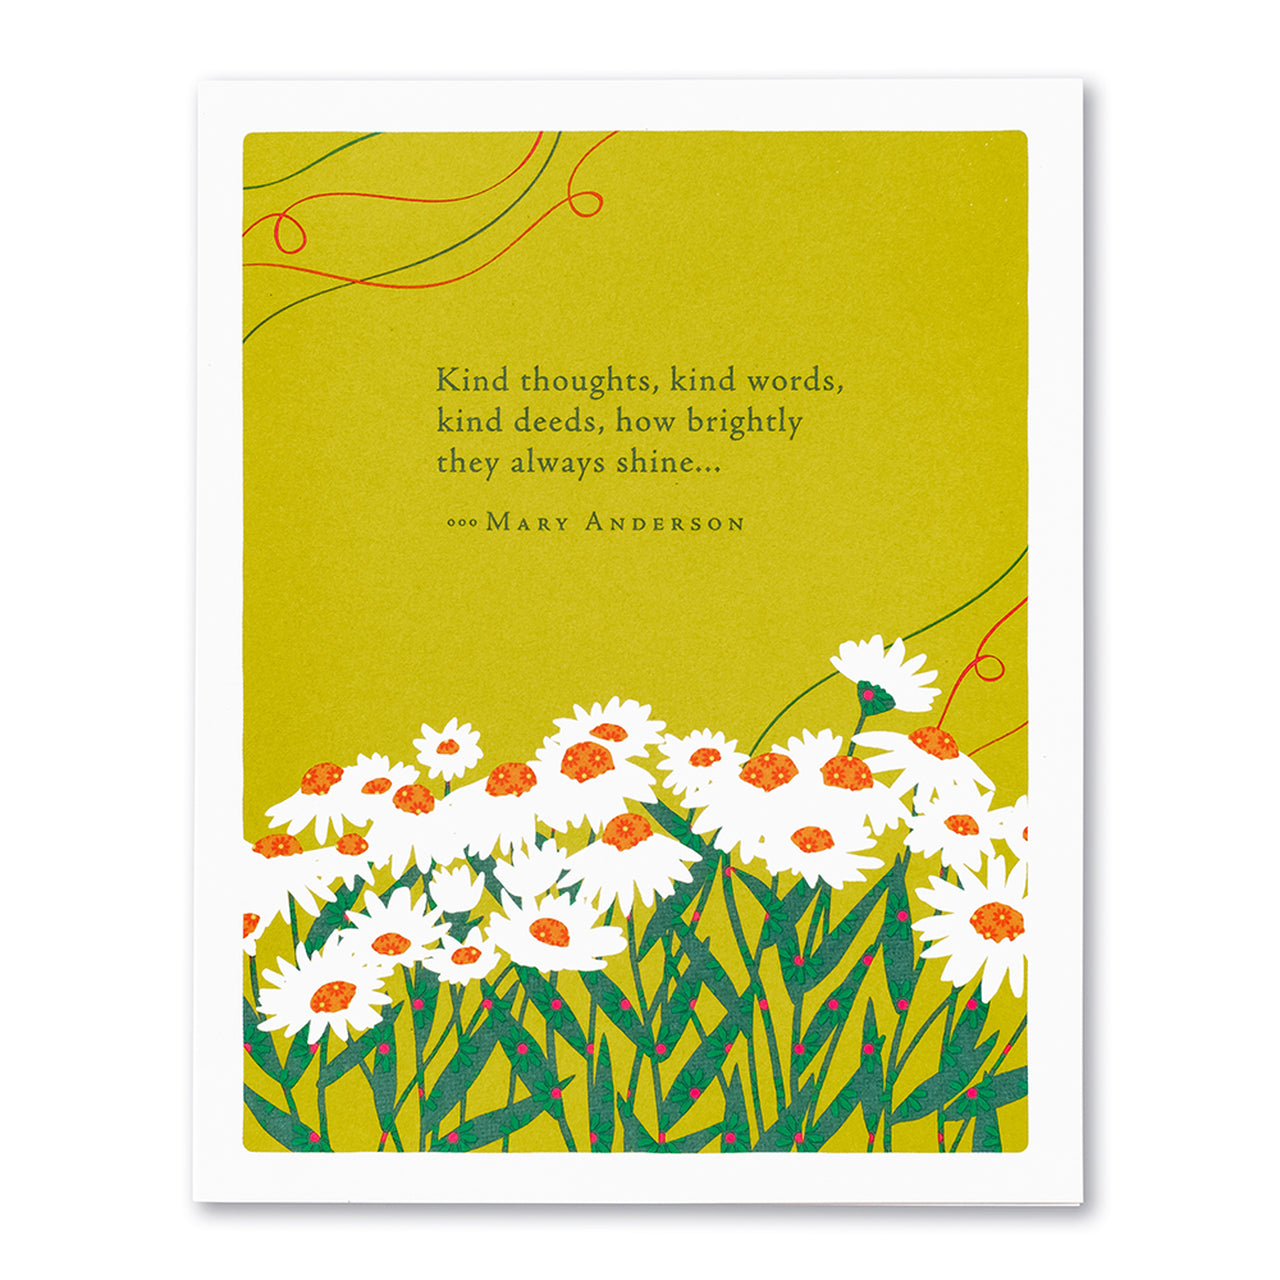 front of card is daisies and text